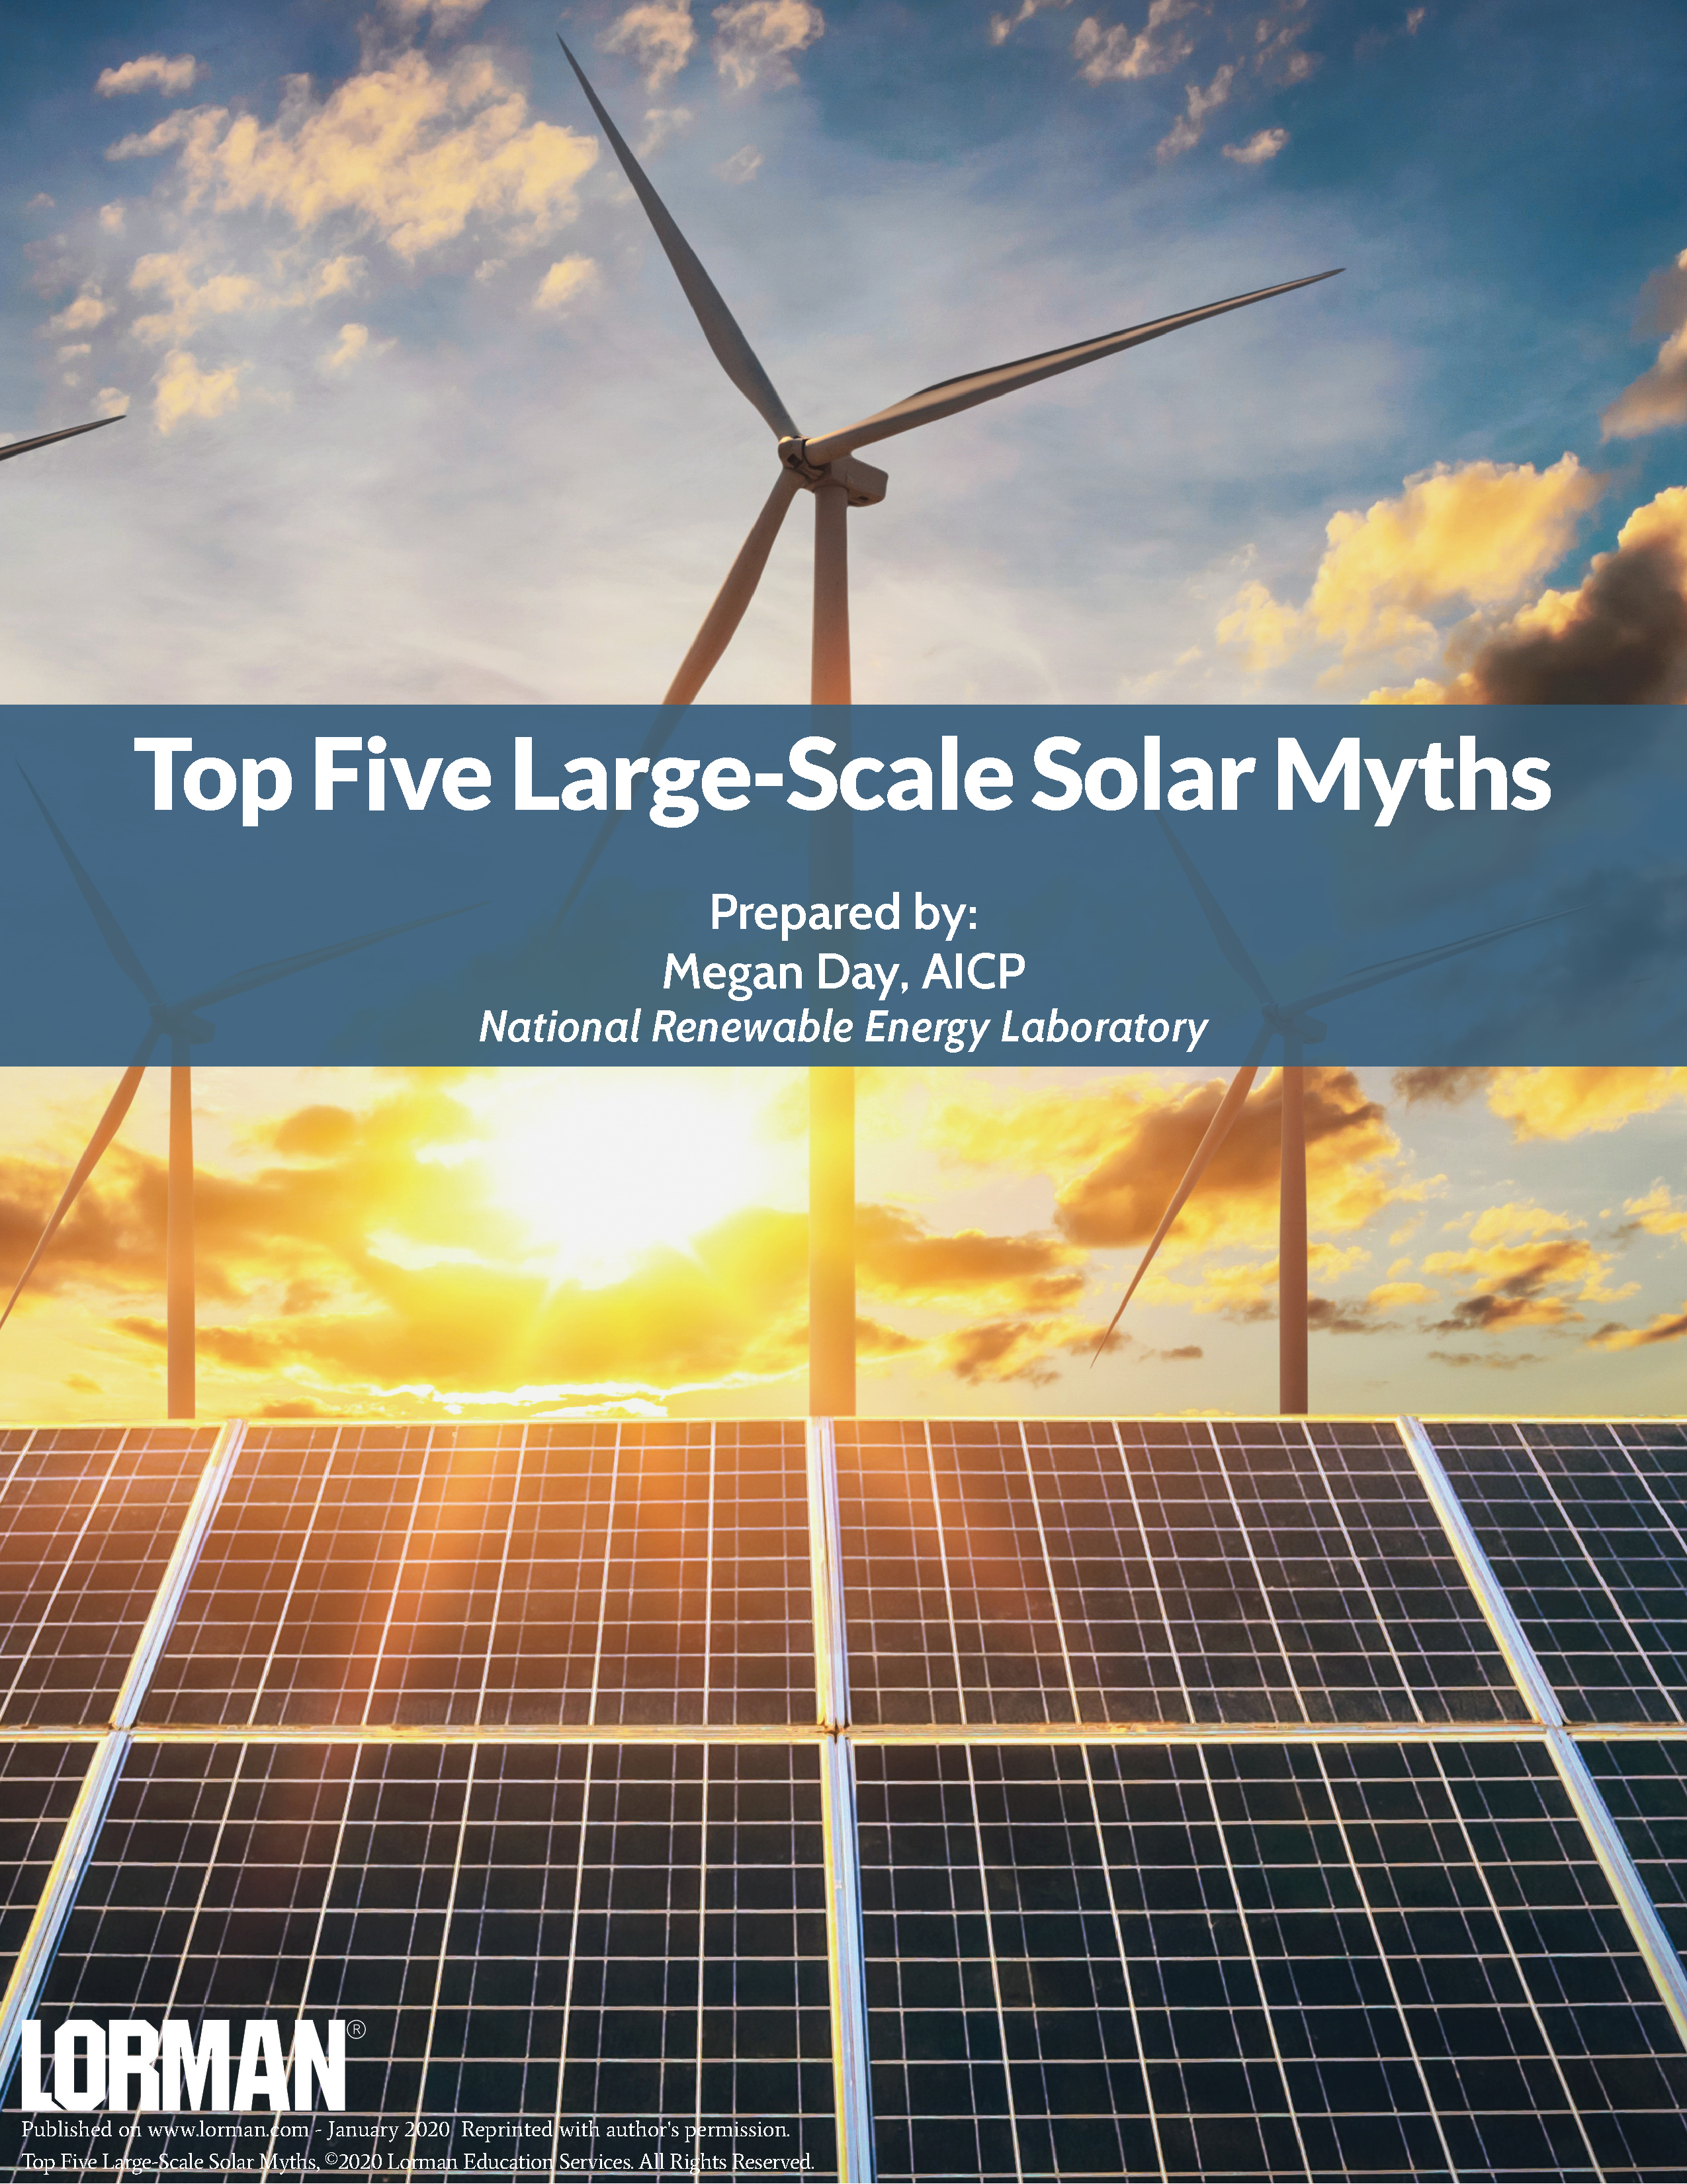 Top Five Large-Scale Solar Myths